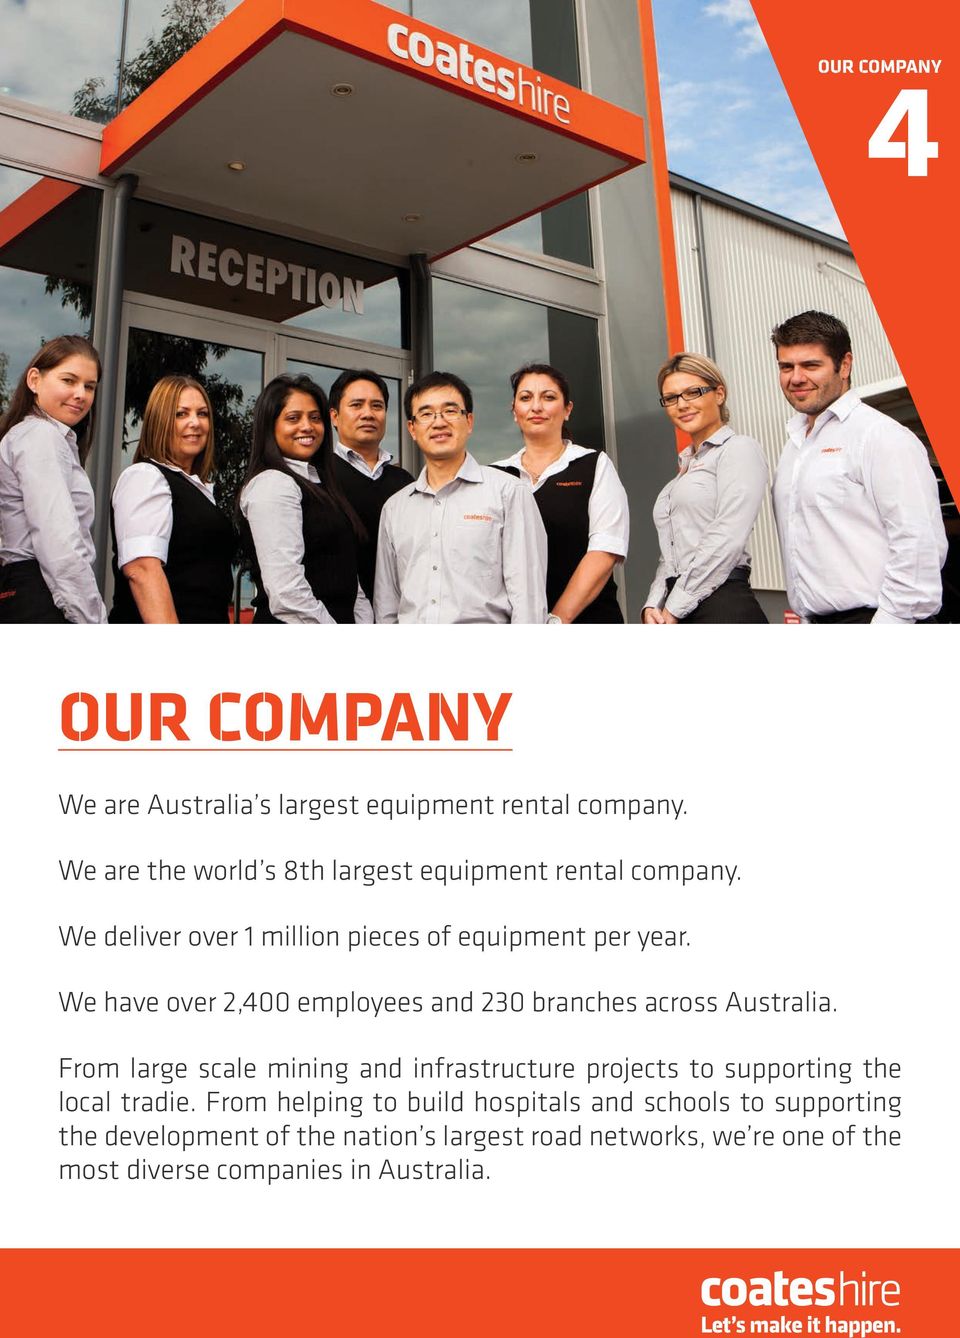 We have over 2,400 employees and 230 branches across Australia.